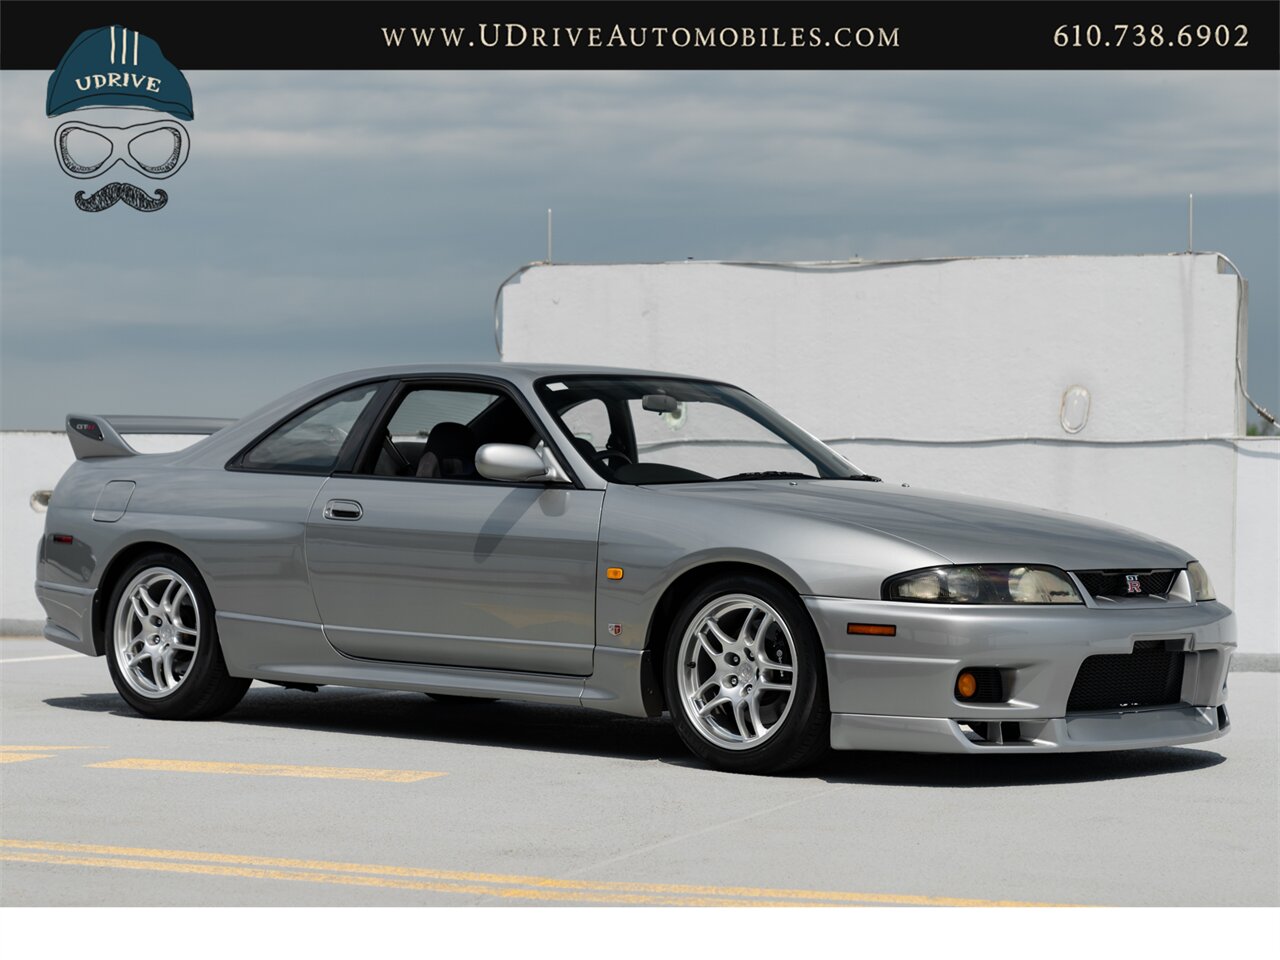 1997 Nissan Skyline GT-R R33 28k Miles Collector Grade  Motorex Legally Imported Titled Federalized Service History - Photo 13 - West Chester, PA 19382